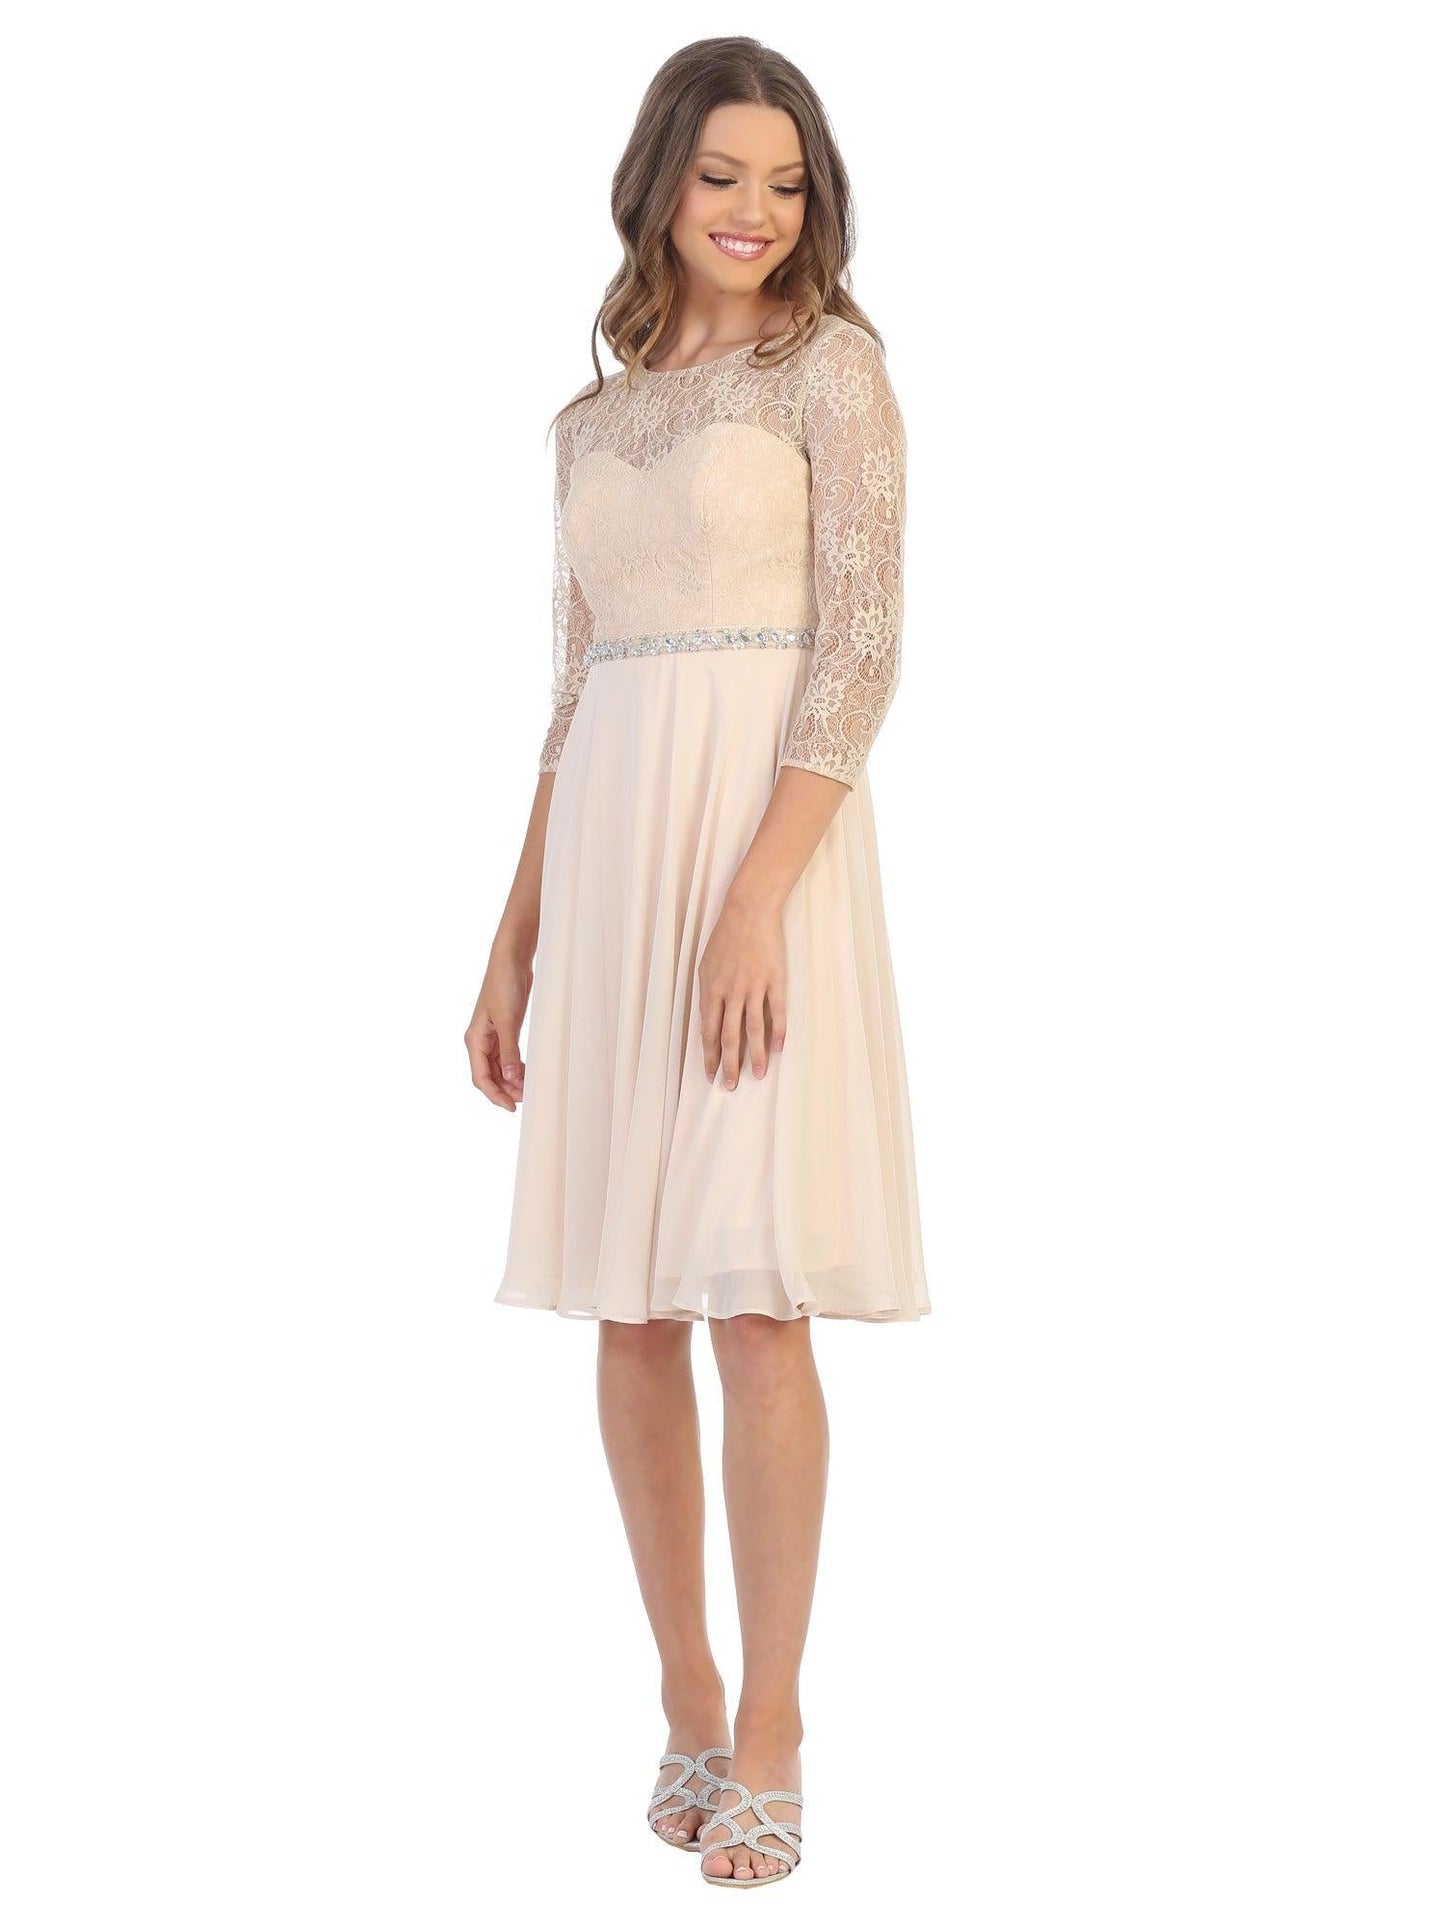 Short 3/4 Sleeve Lace Cocktail Dress - The Dress Outlet